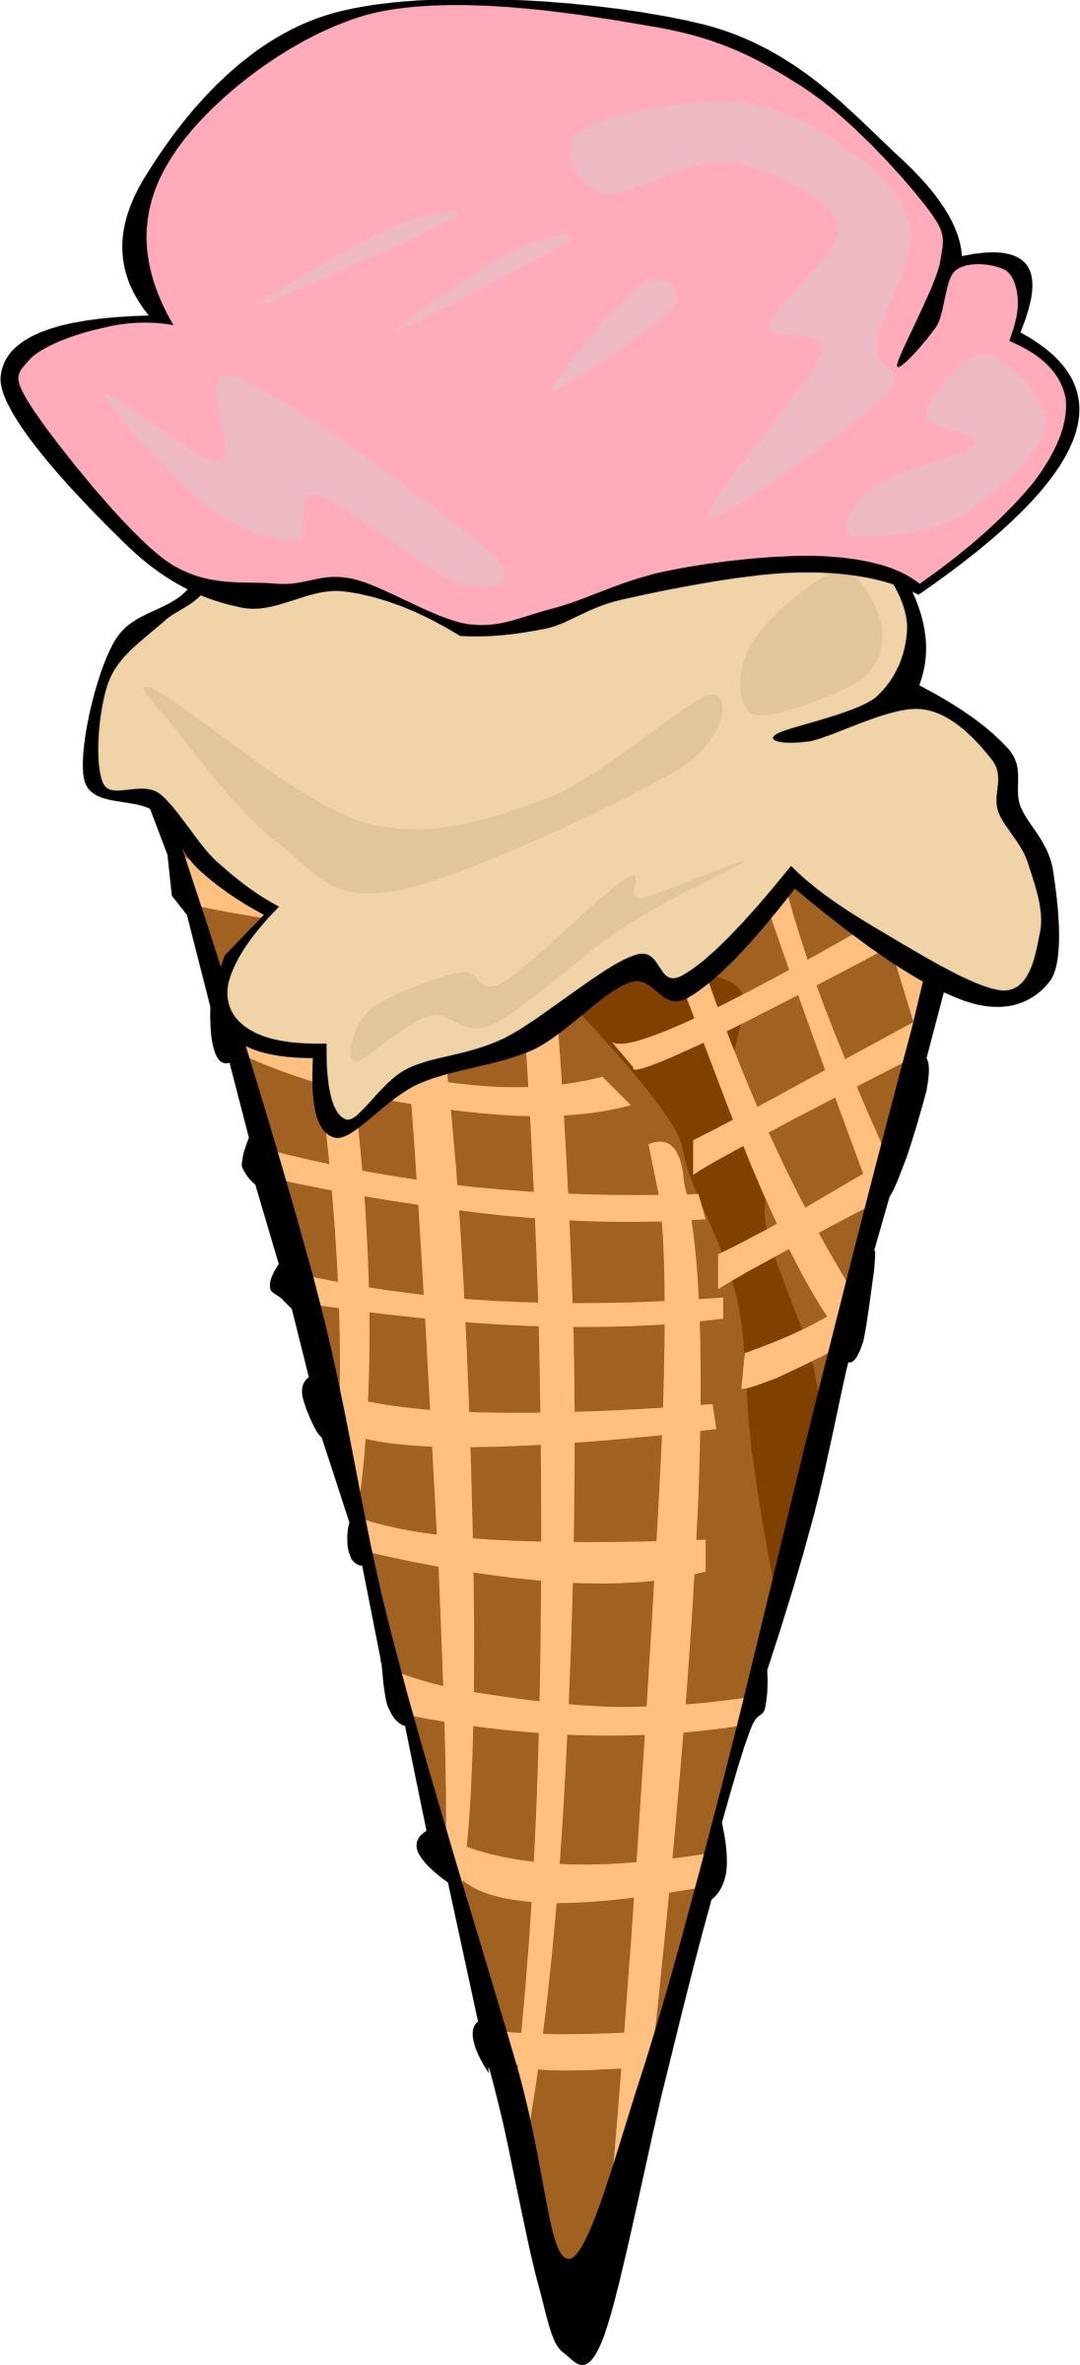 Fast Food, Desserts, Ice Cream Cones, Waffle, Double png transparent